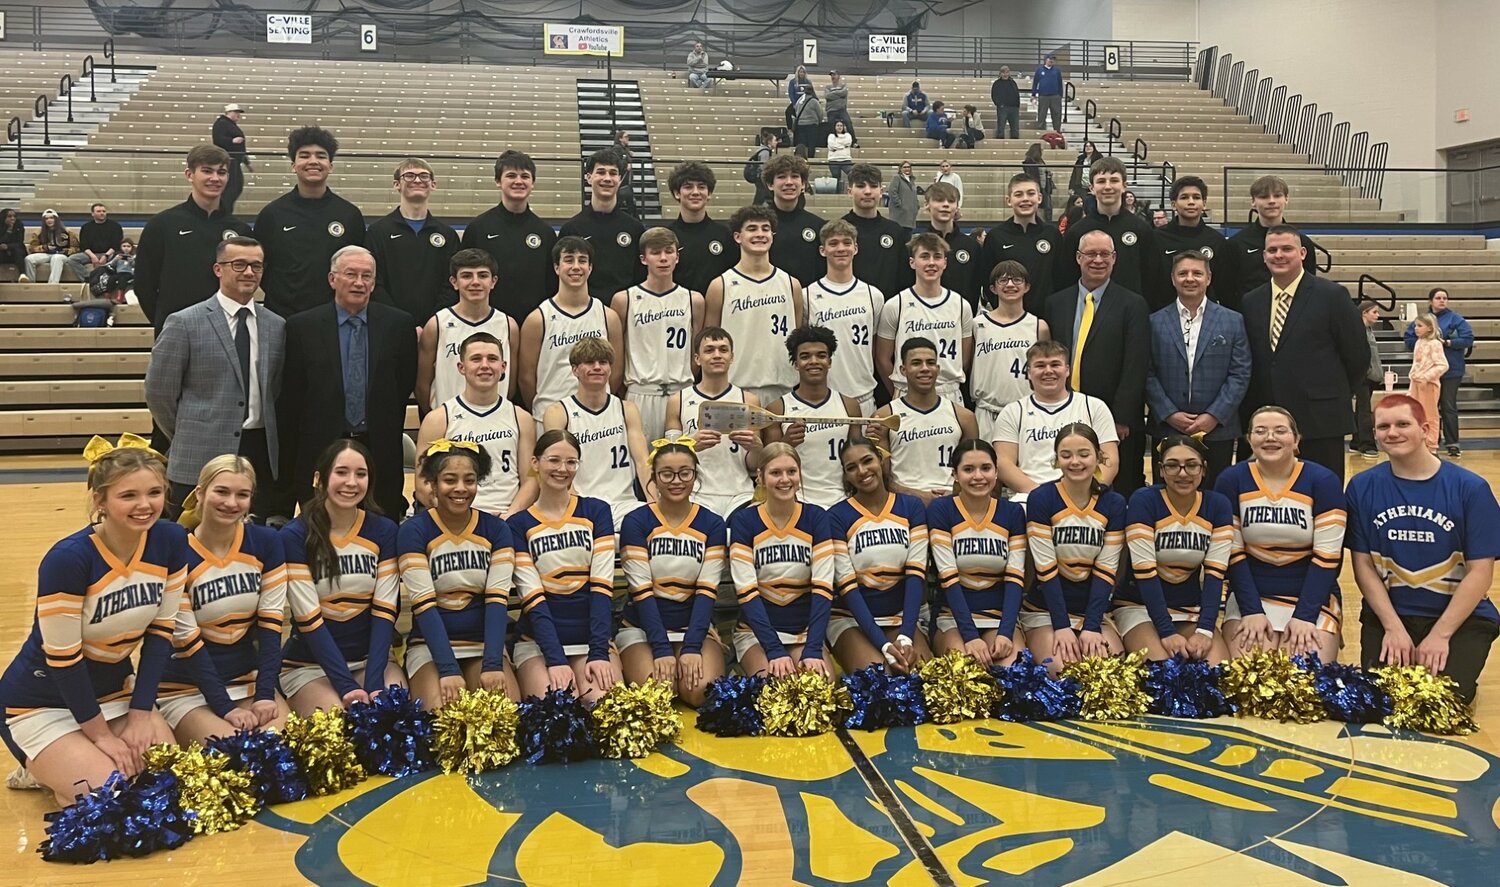 Crawfordsville boys basketball won their 2nd Sugar Creek Classic title in the last three years and 5th overall with a 53-44 win over county rival Southmont.